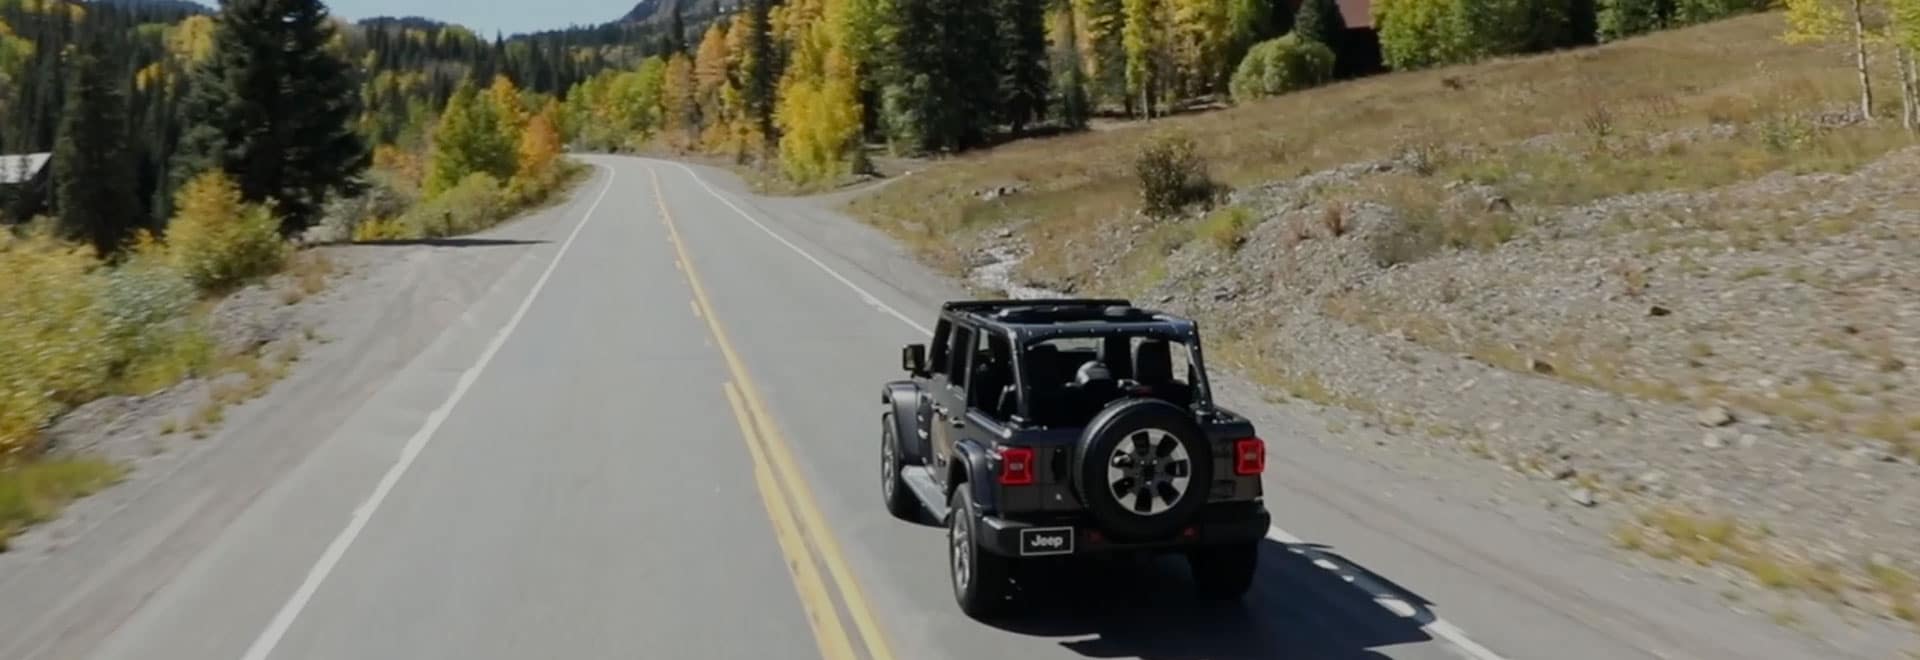 Operate The Wrangler JL Soft Top | faqs | Safford of Winchester